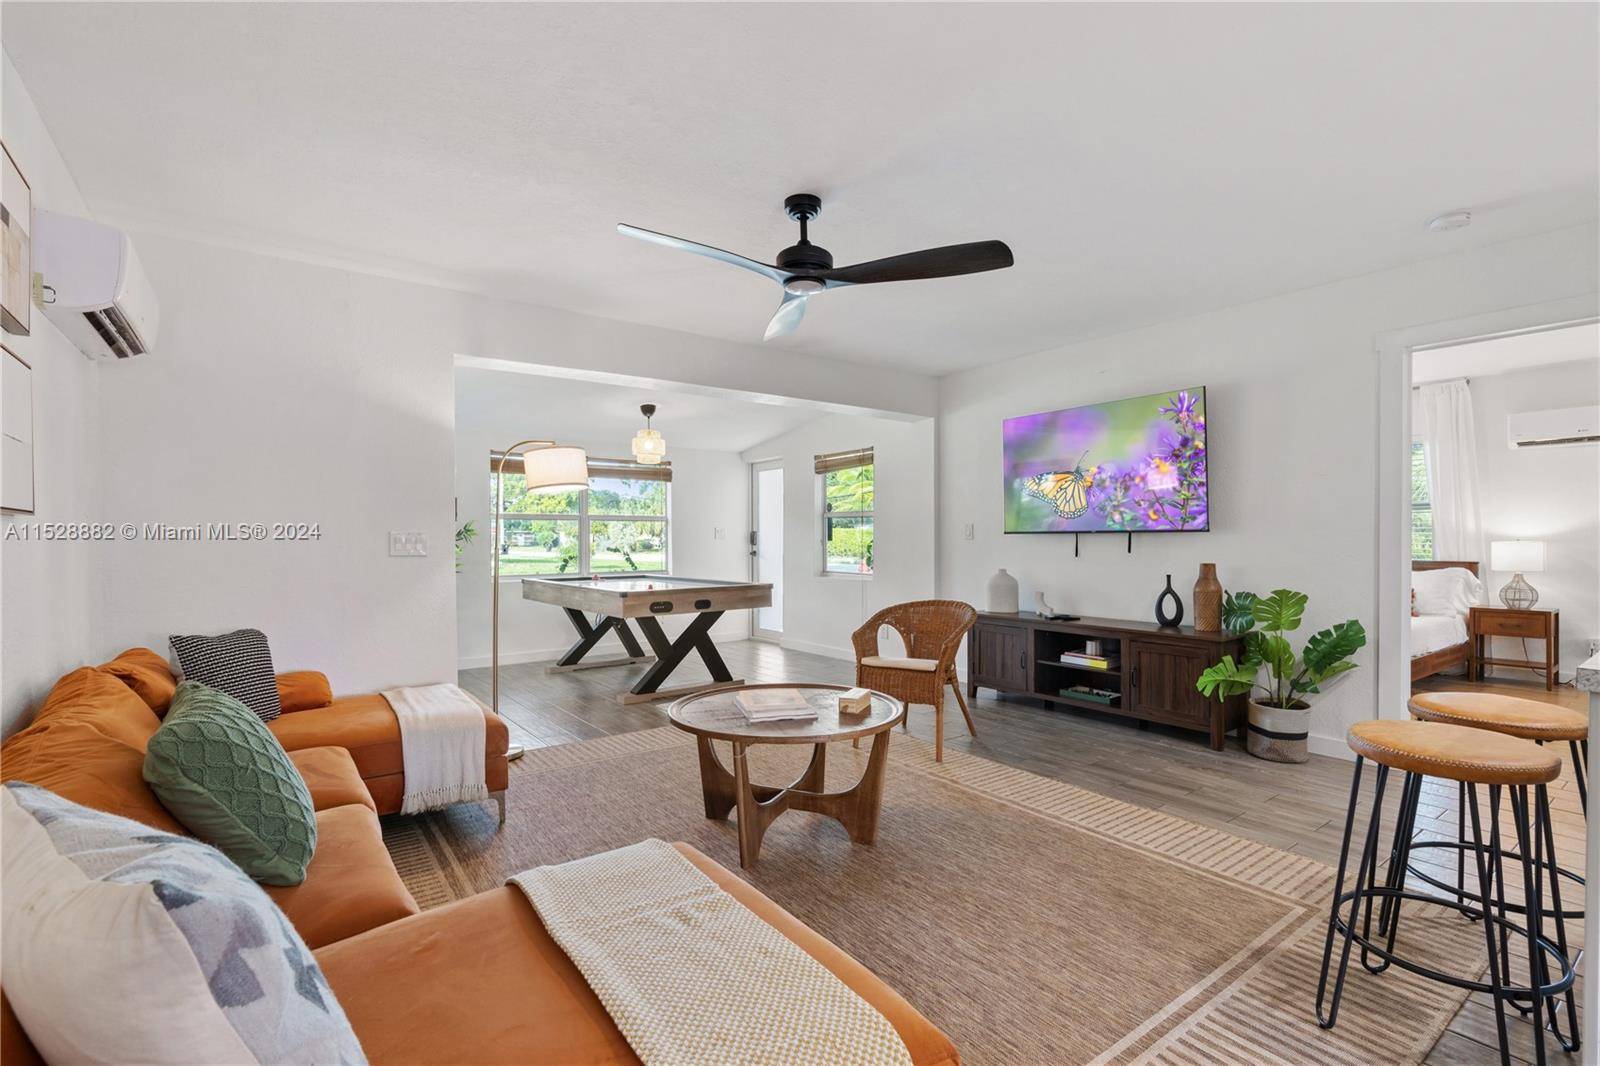 Discover this turn key, fully furnished duplex, each unit offering a approximately 826 sq ft of updated living space with 1 bed, 1 bath on each side.